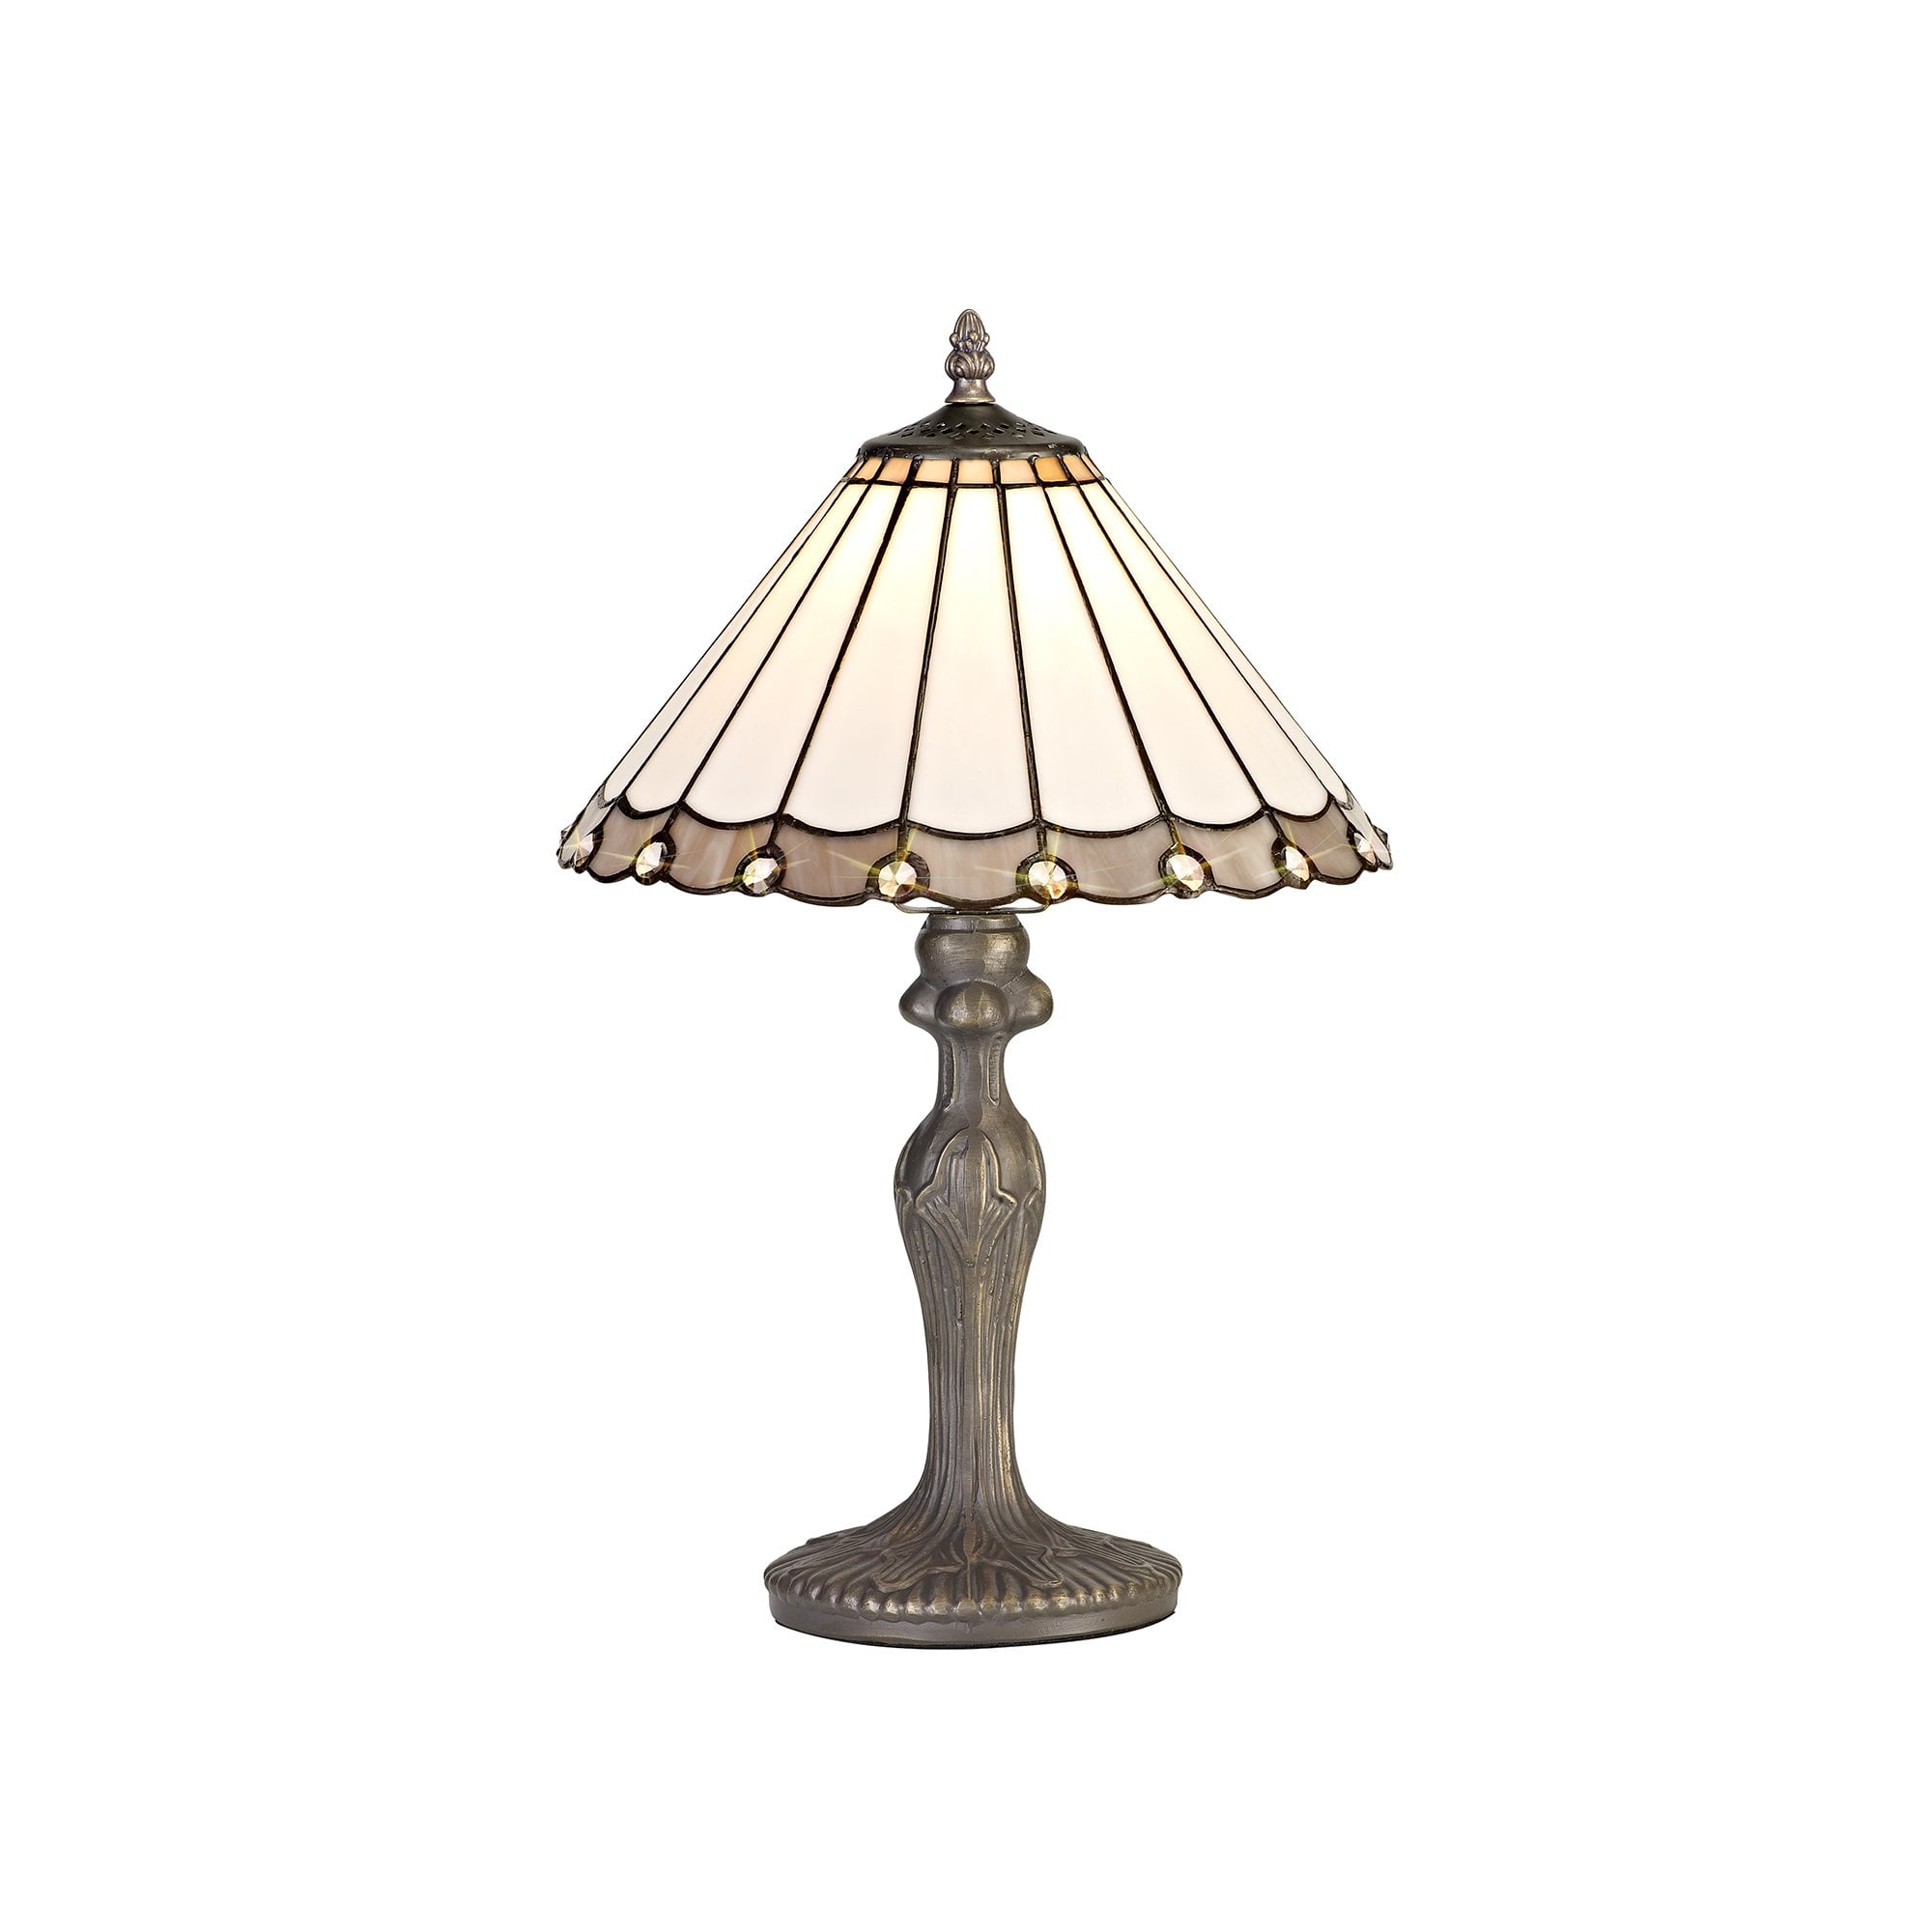 1 Light Curved Table Lamp E27 With 30cm Tiffany Shade, Grey/Cream/Crystal/Aged Antique Brass